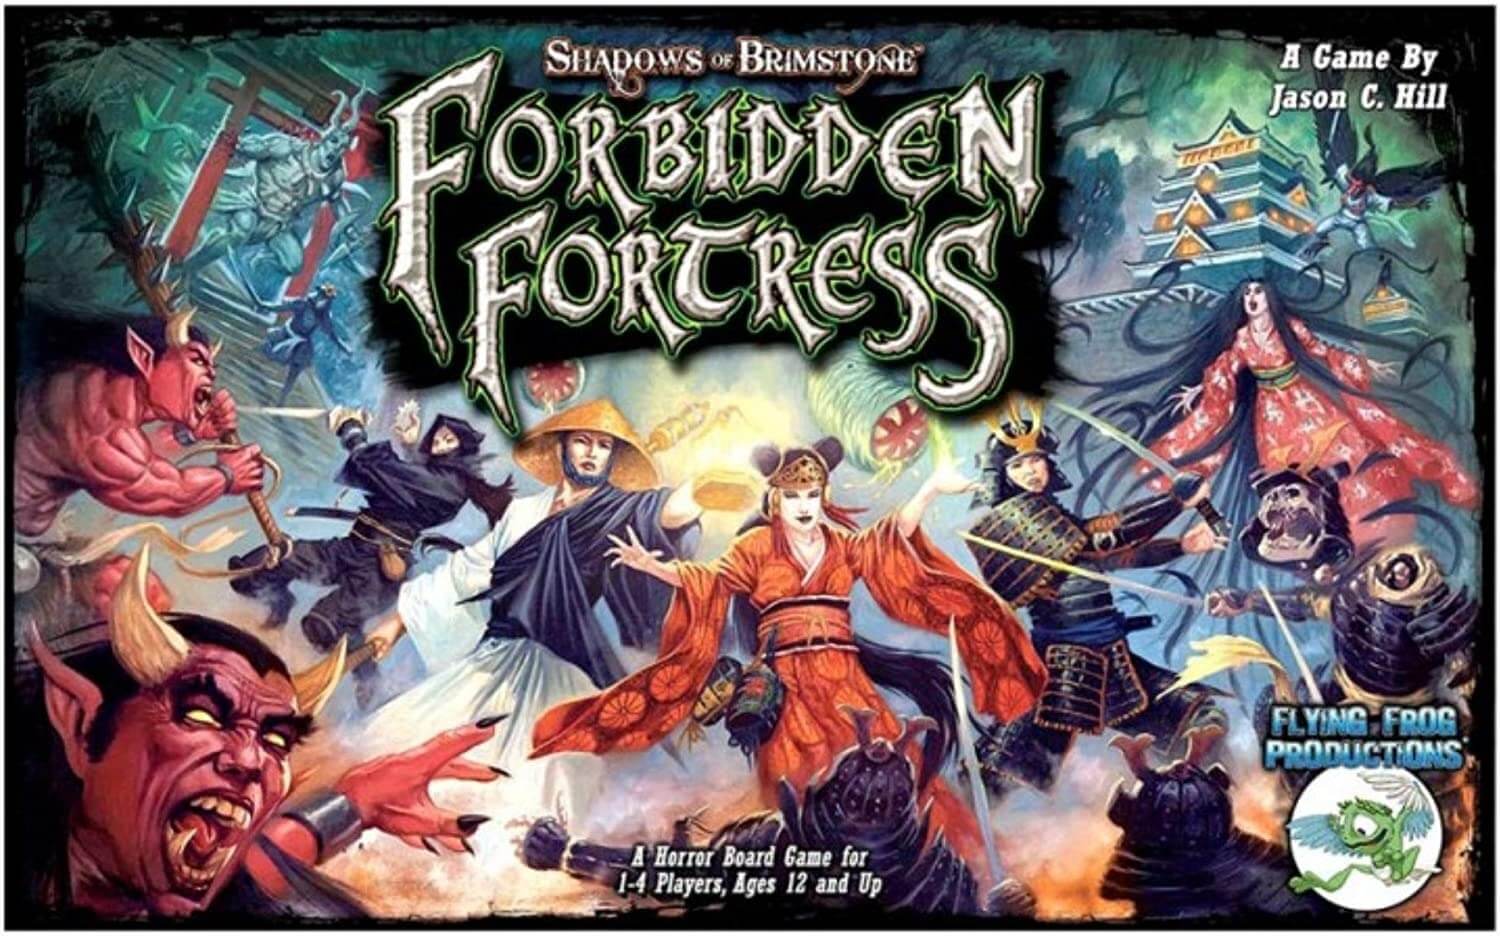 clare c lord of shadows Настольная игра Flying Frog SoB: Forbidden Fortress Core Set